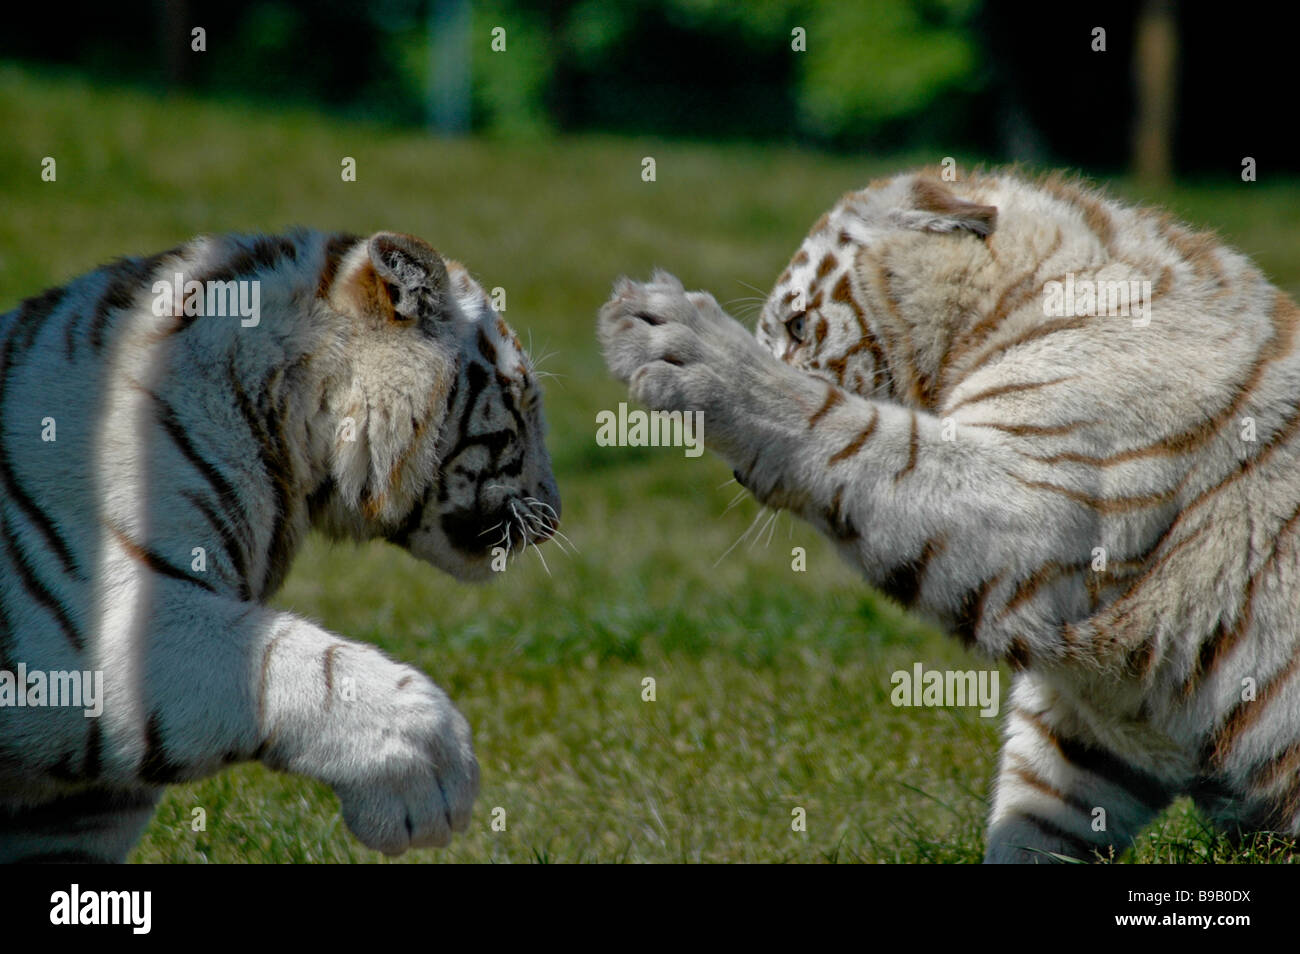 Two white tigers fighting Stock Photo